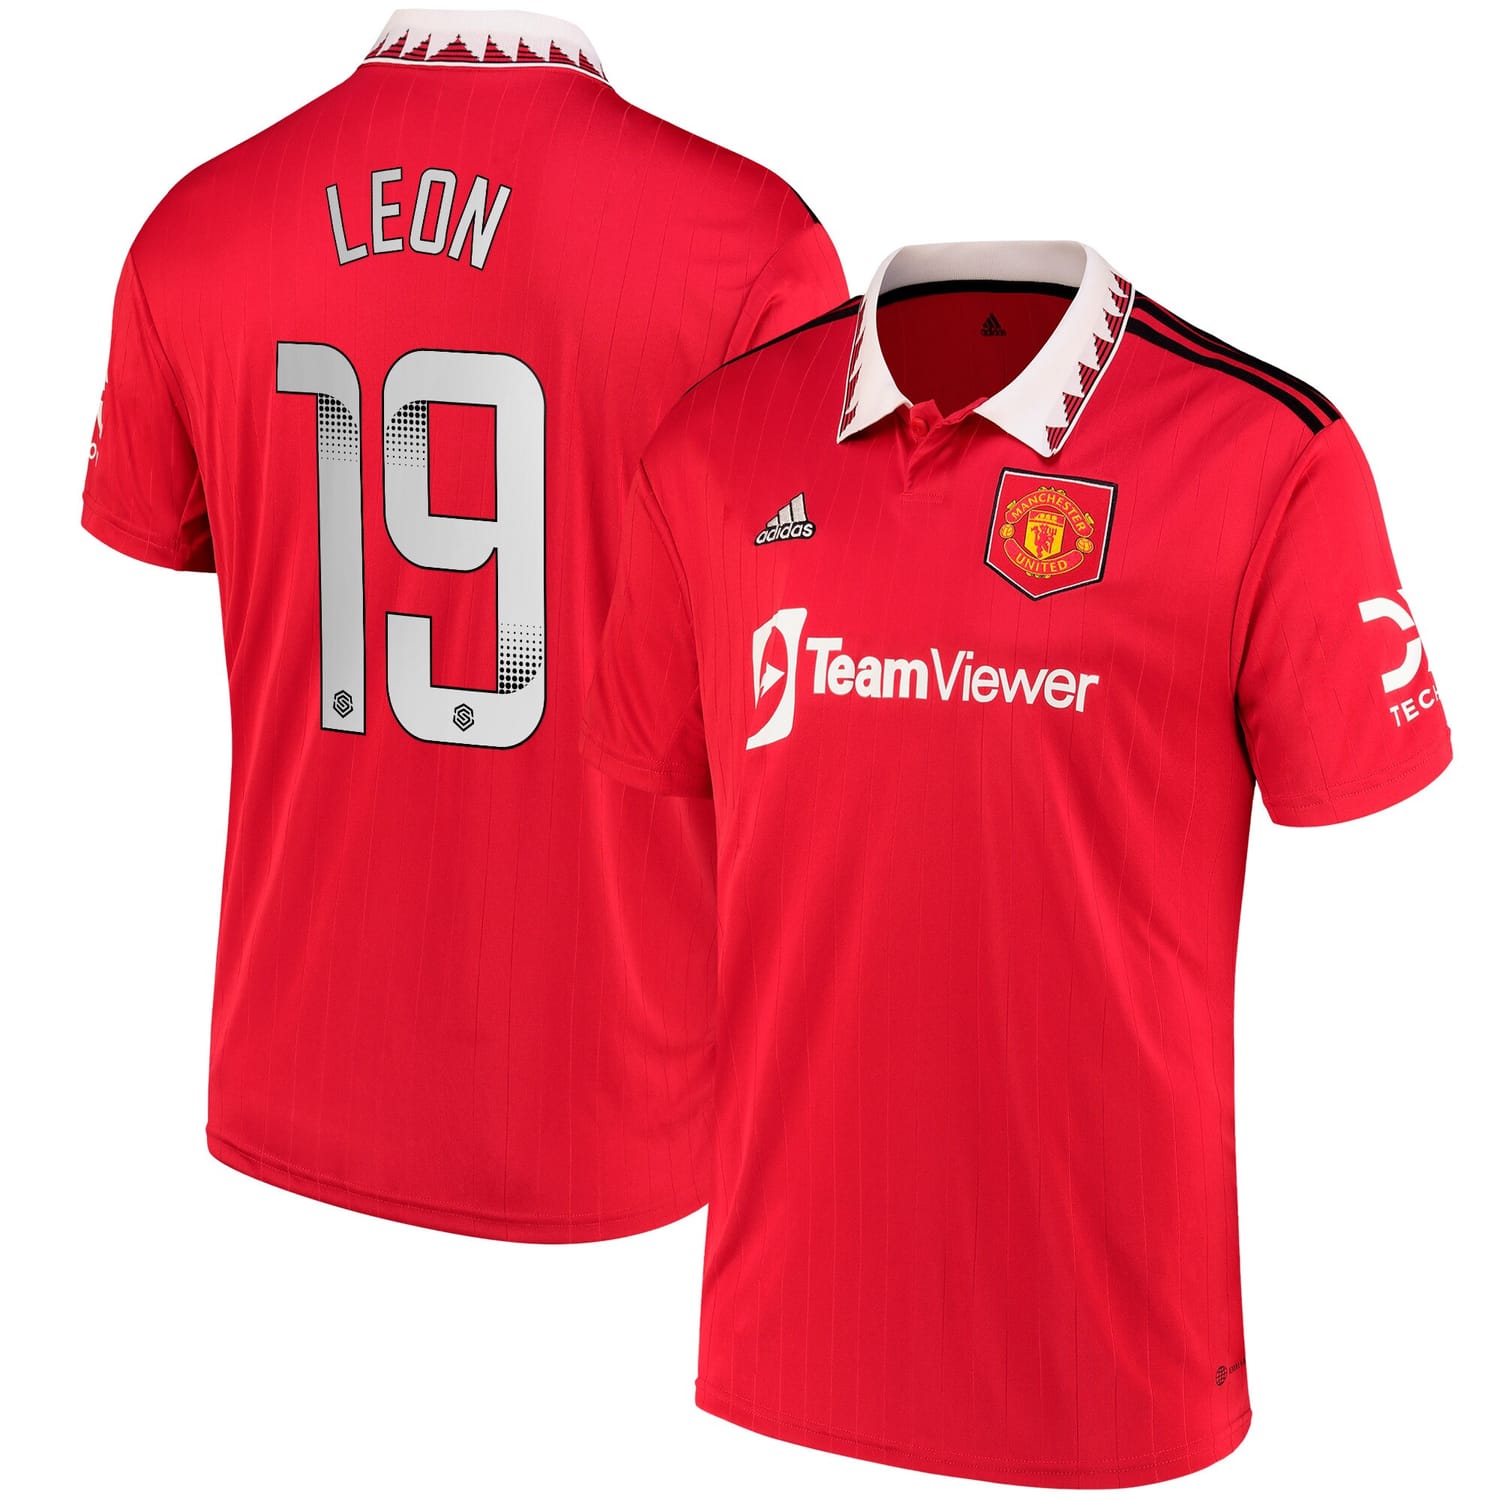 Premier League Manchester United Home WSL Jersey Shirt 2022-23 player Adriana Leon 19 printing for Men